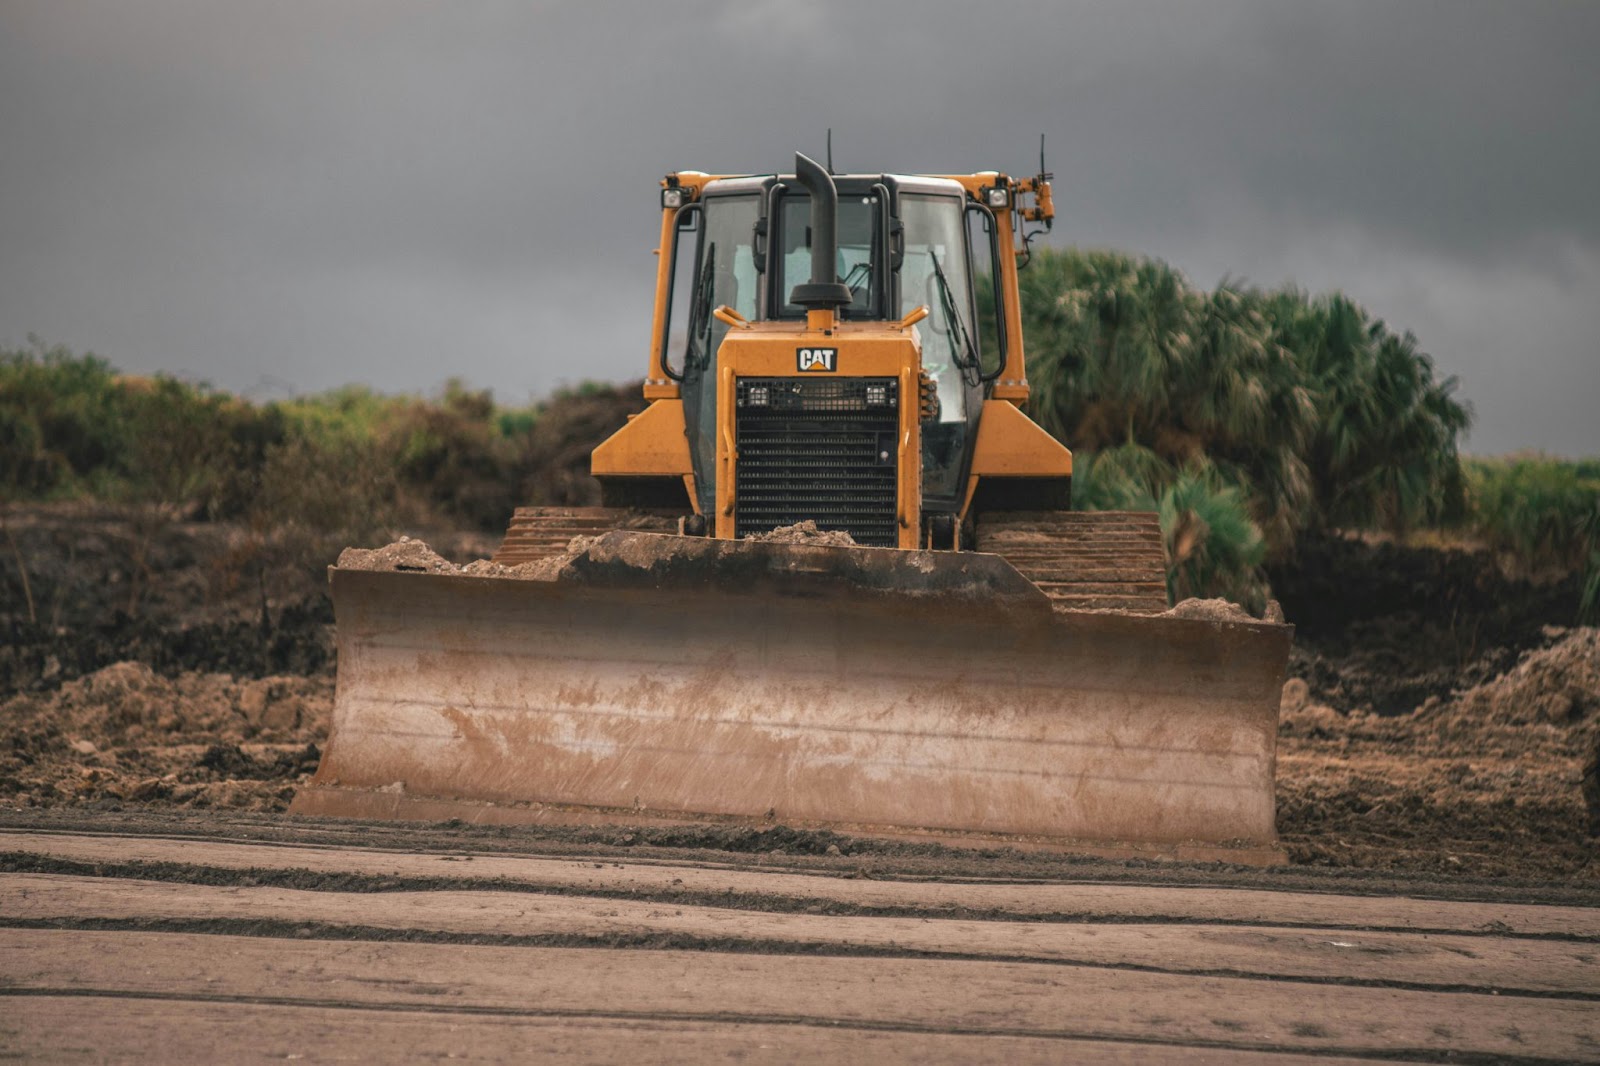 A bulldozer, a type of heavy construction equipment, moves earth on a site.